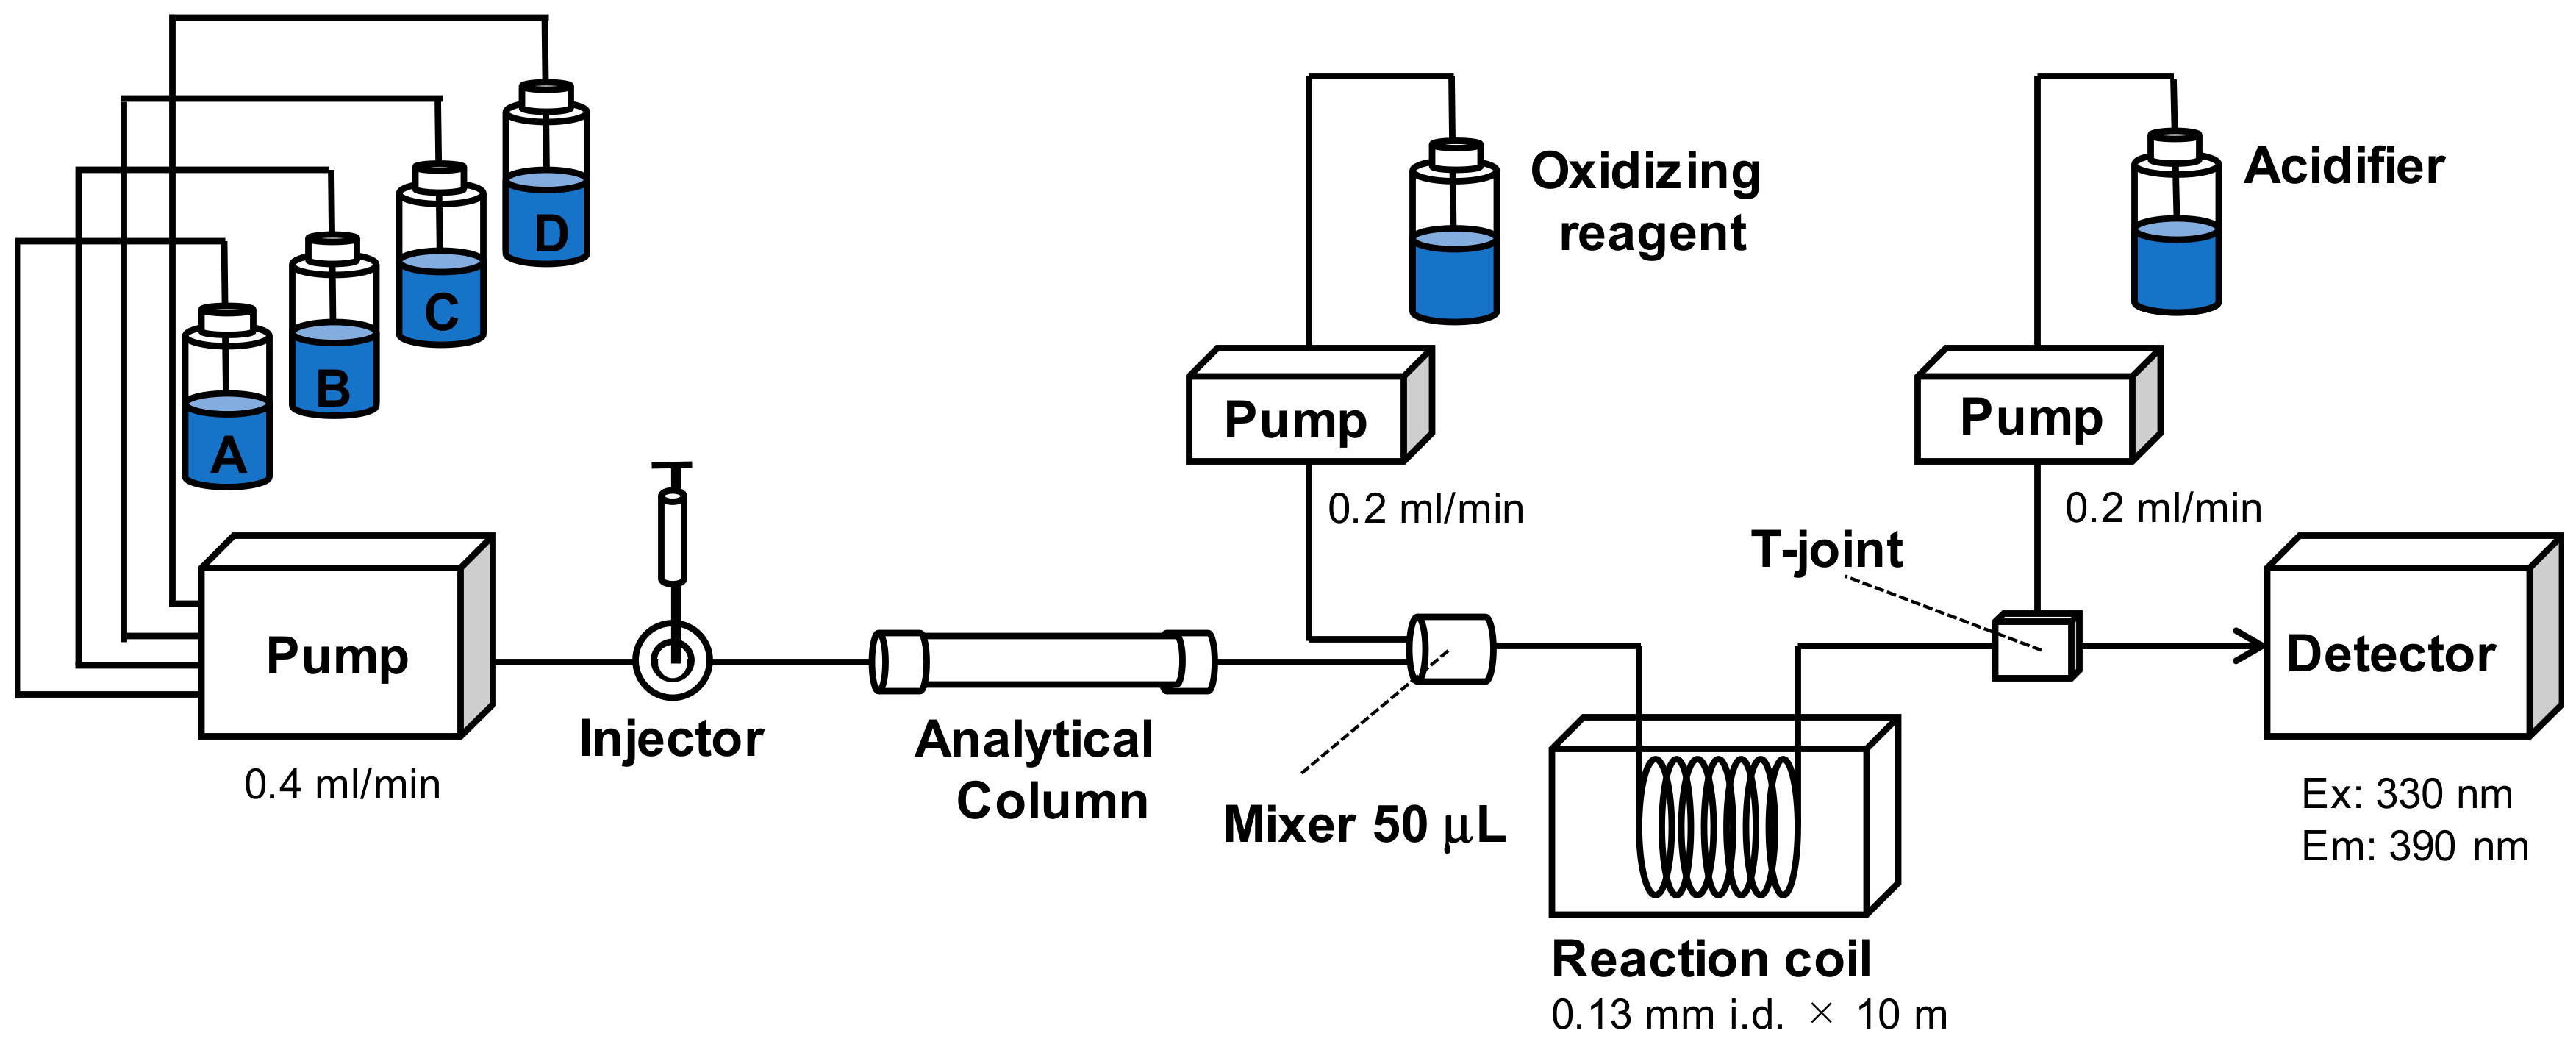 Toxins | Free Full-Text | Development of Ultra-Performance Liquid  Chromatography with Post-Column Fluorescent Derivatization for the Rapid  Detection of Saxitoxin Analogues and Analysis of Bivalve Monitoring Samples